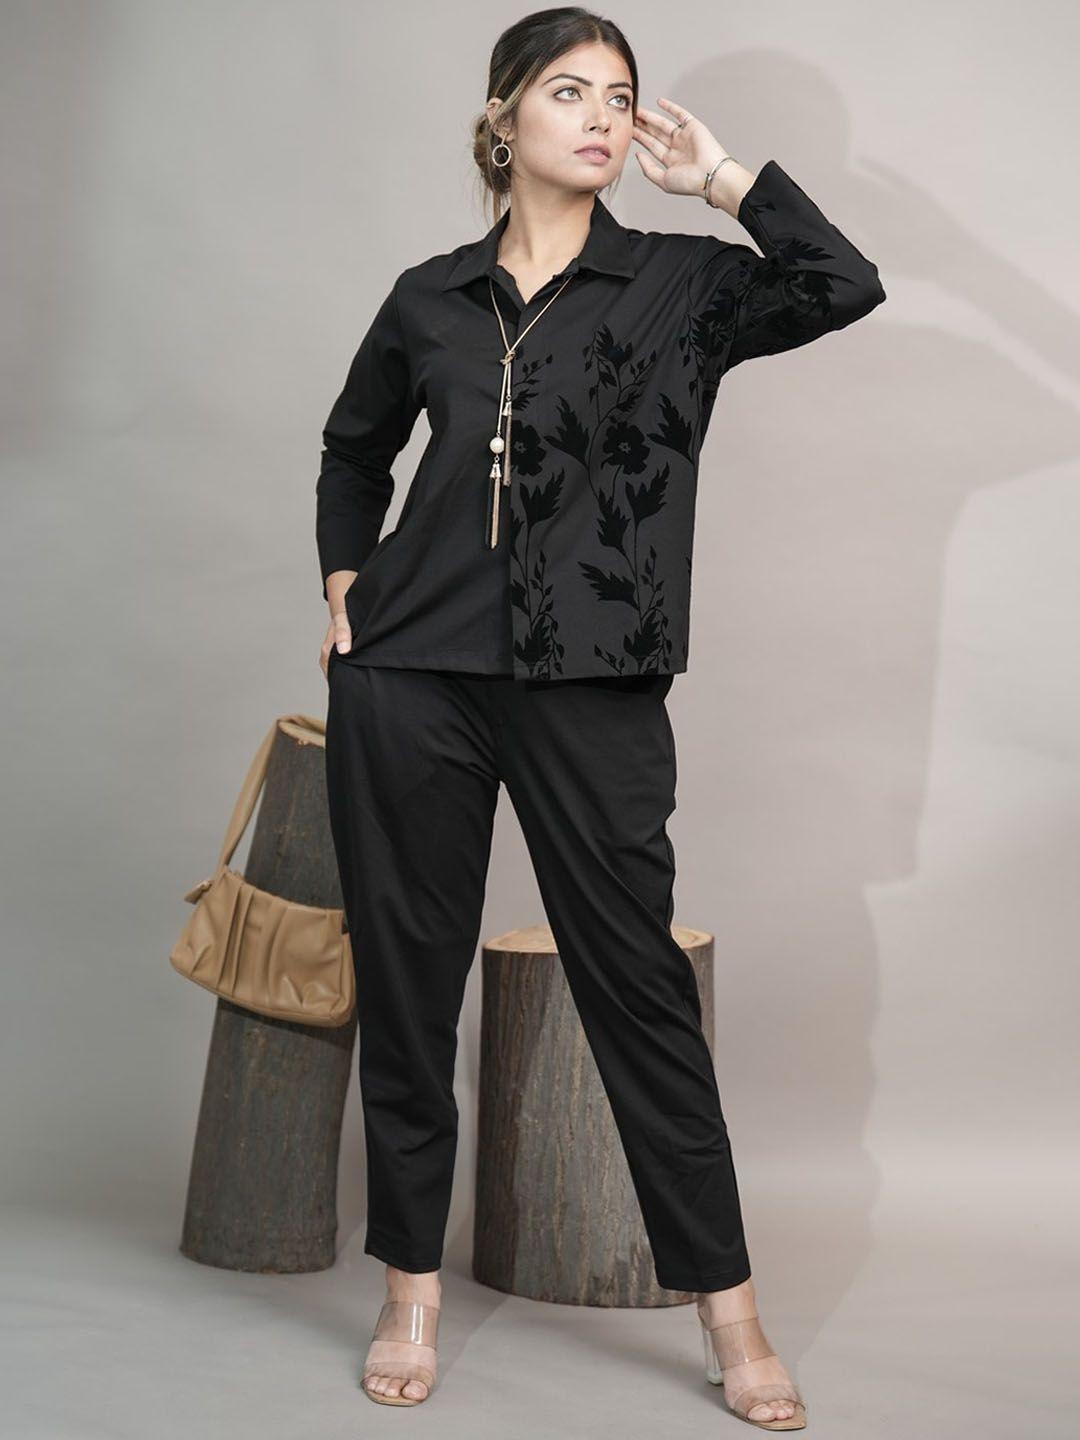 newd floral printed shirt with trouser